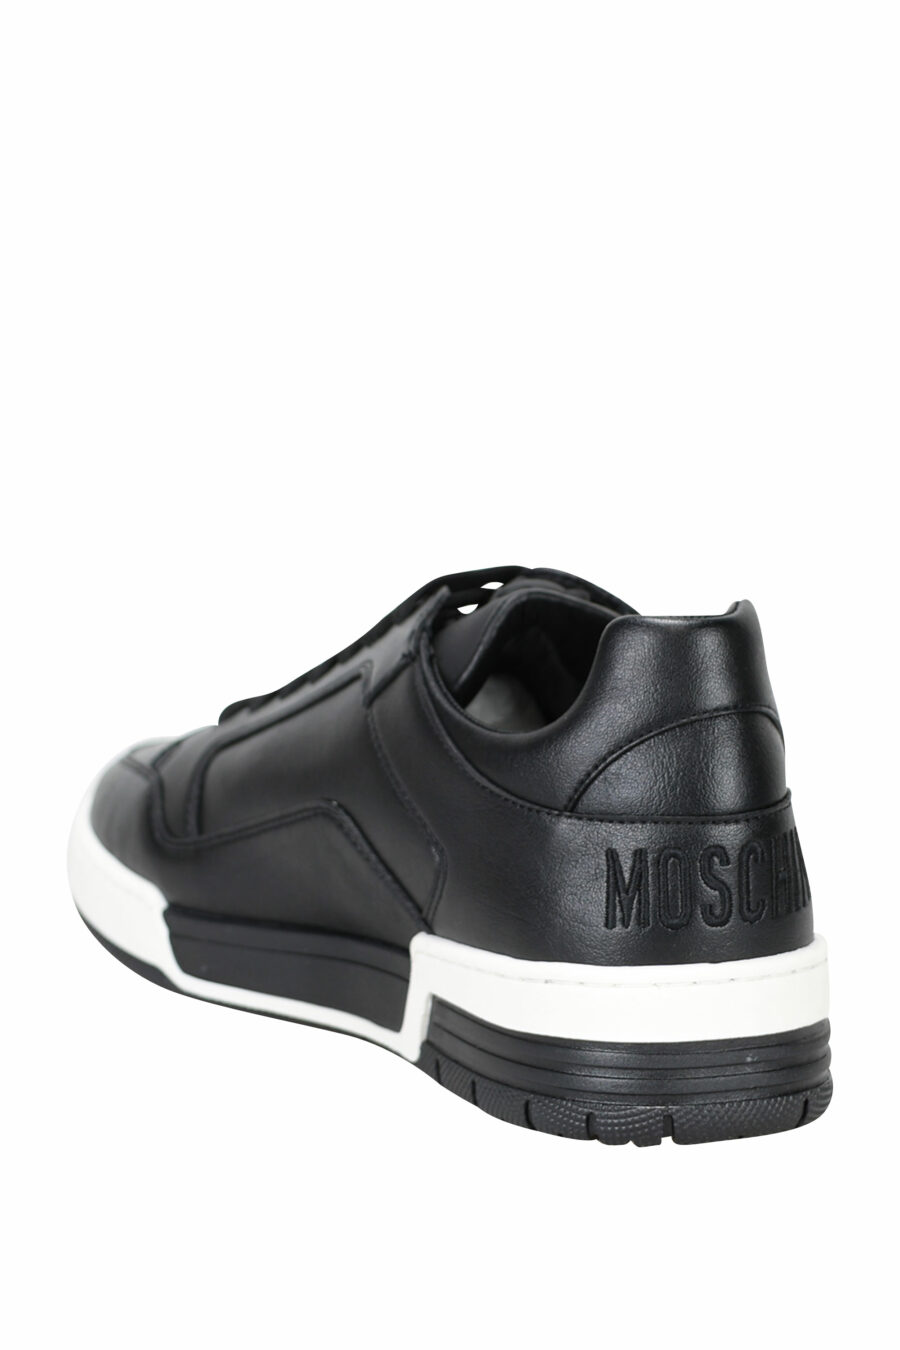 Black leather trainers with white sole and logo - 8054653096394 3